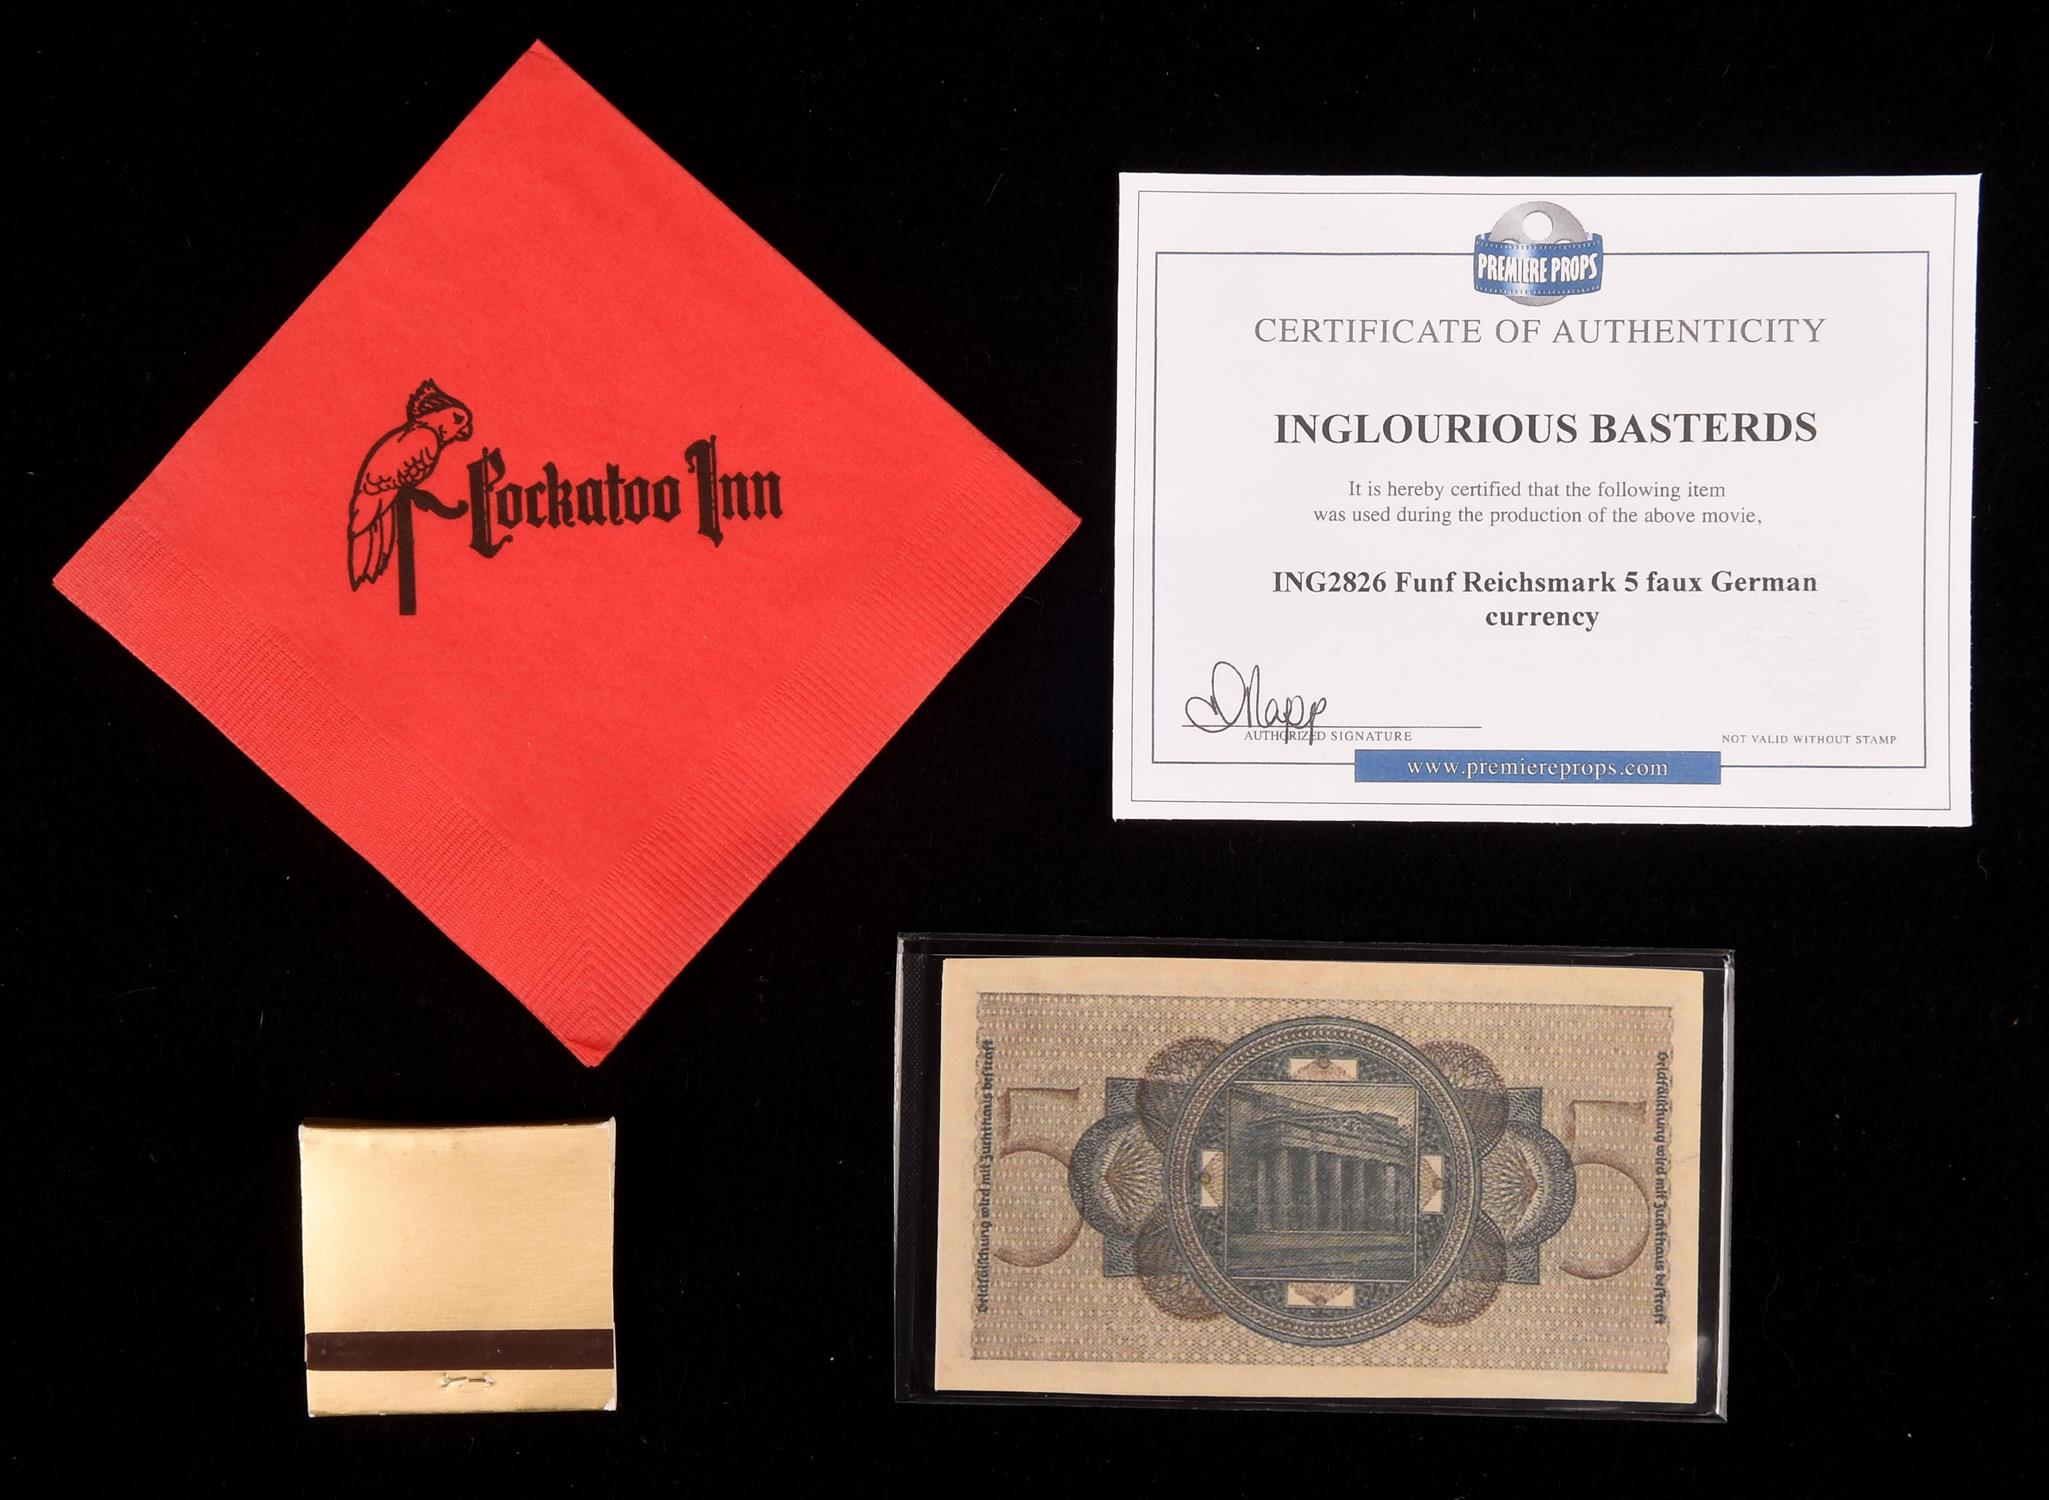 Tarantino props - Including Napkin and Matchbook from the Cockatoo Inn used in Jackie Brown and - Image 2 of 2